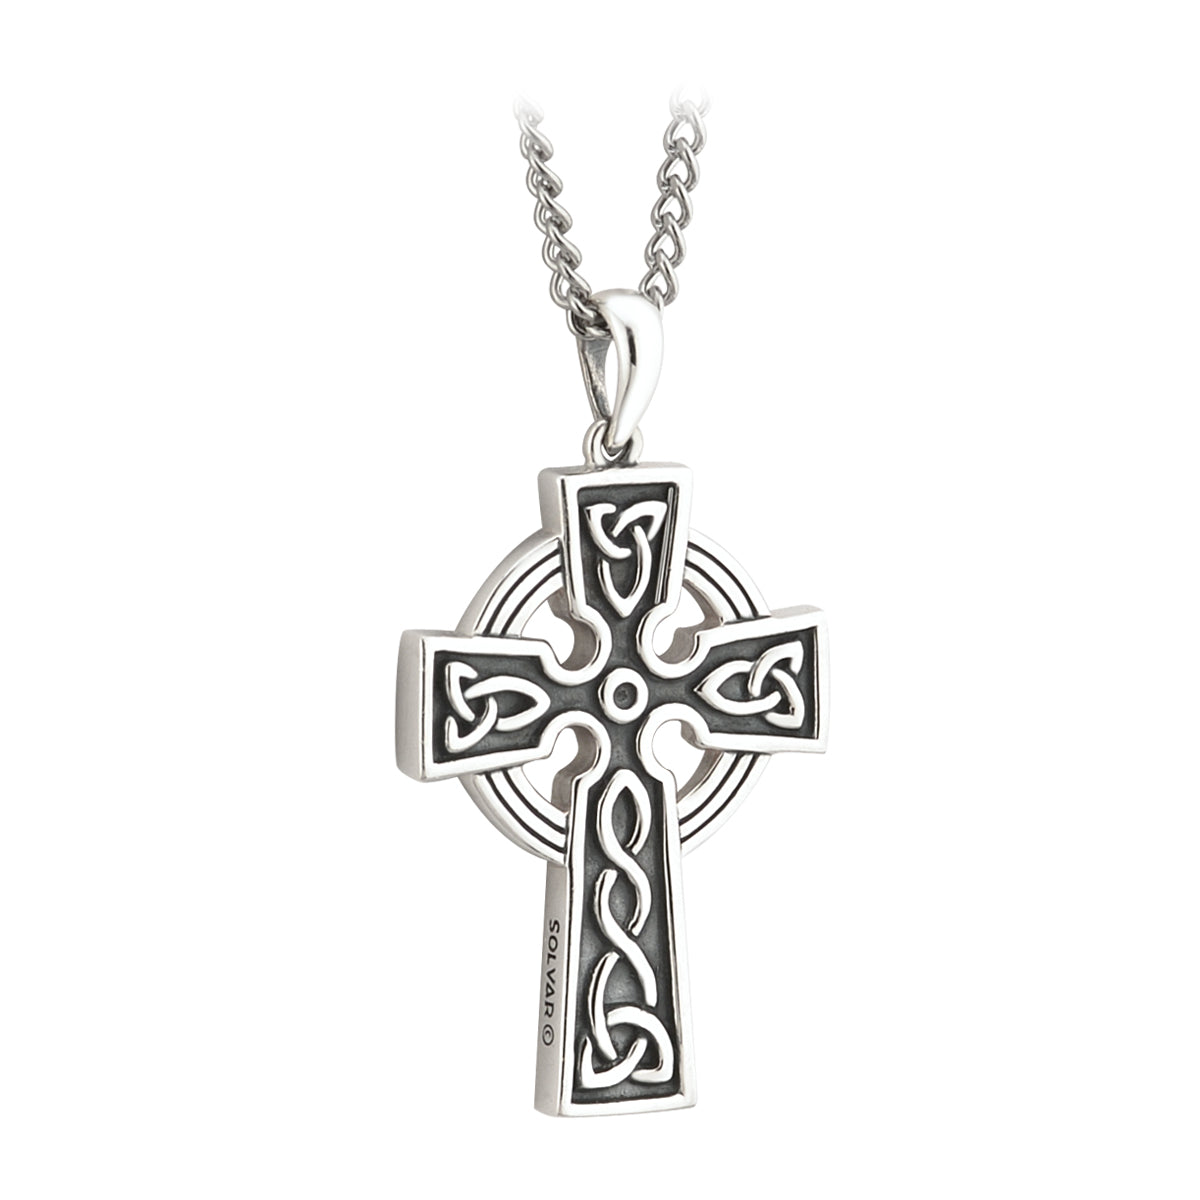 sterling silver double sided oxidised cross pendant s44865 from Solvar